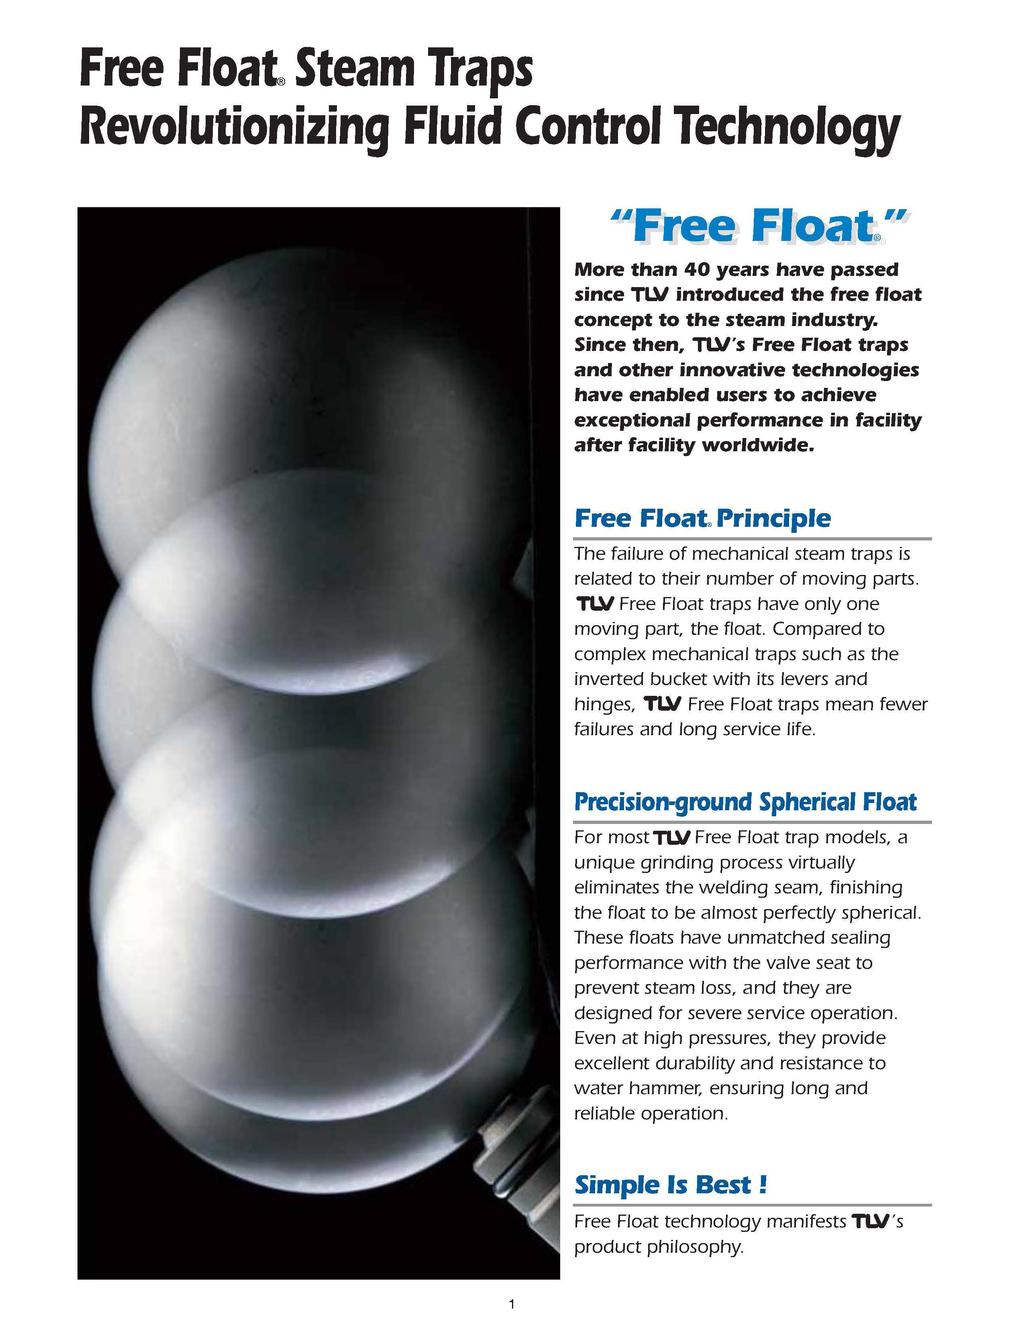 Free Float Steam Traps Revolutionizing Fluid Control Technology More than 40 years have passed since TUI introduced the free float concept to the steam industry.